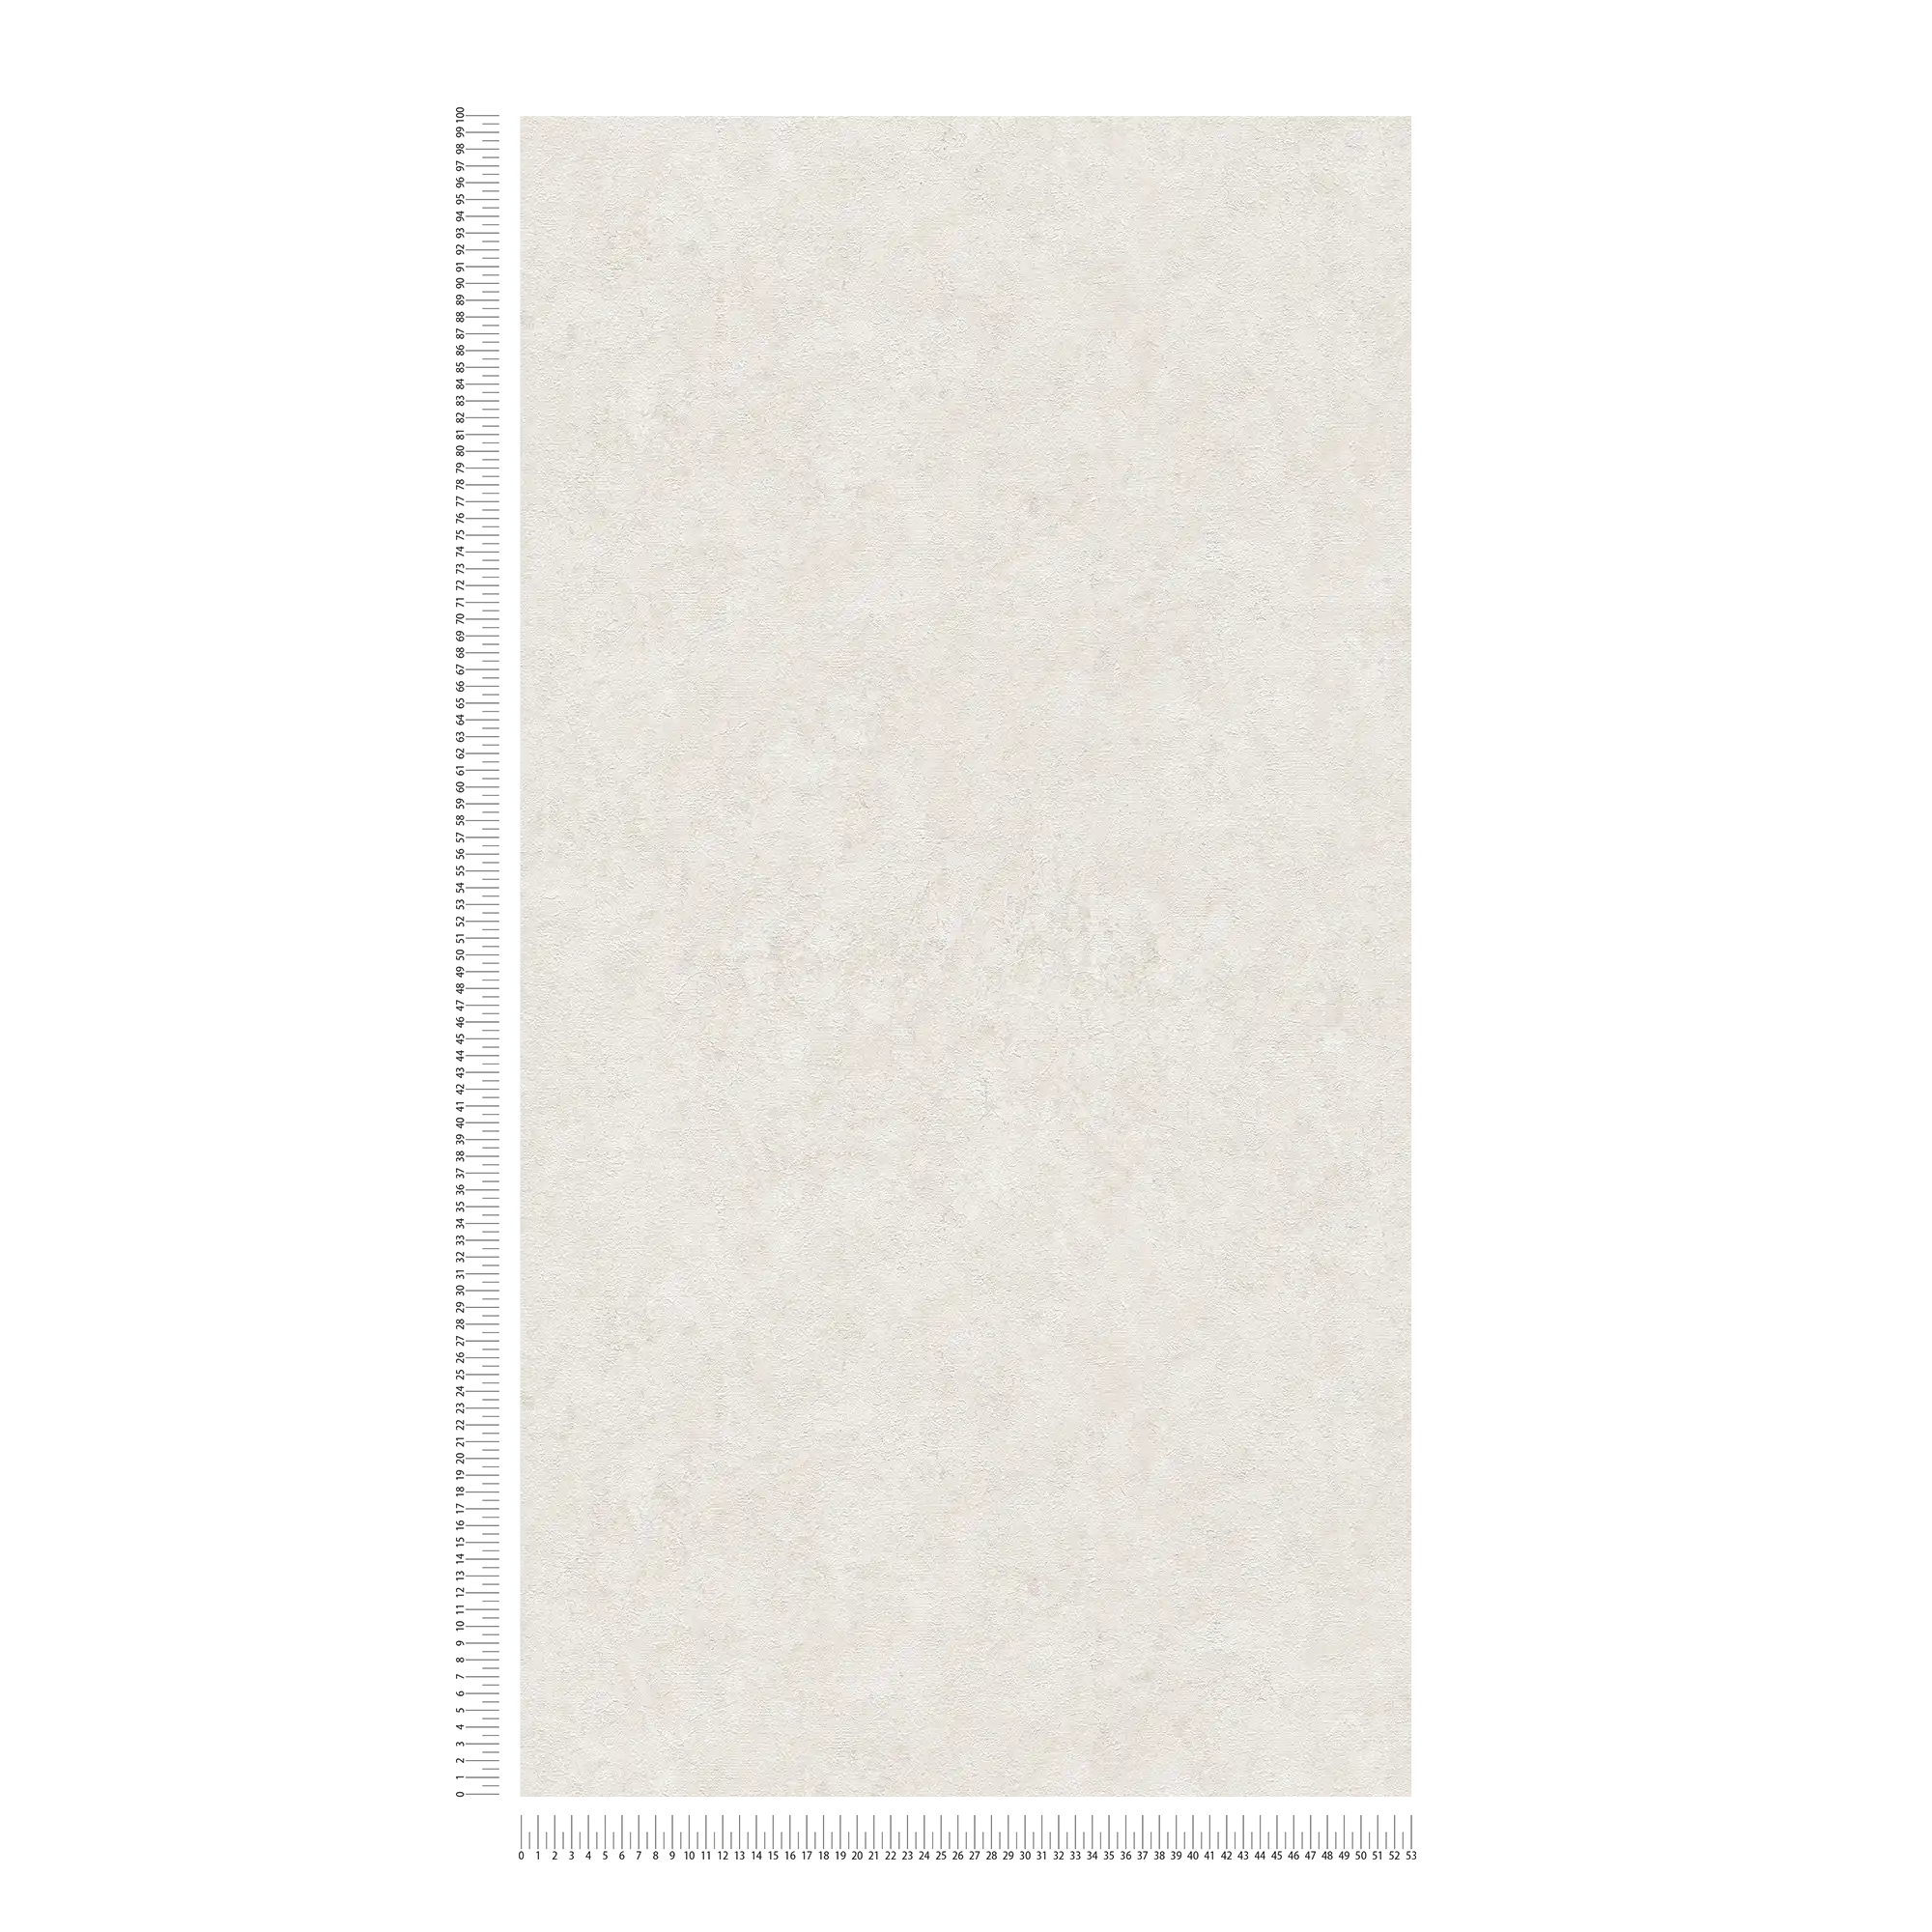             Non-woven wallpaper plain with textured pattern - white, light grey
        